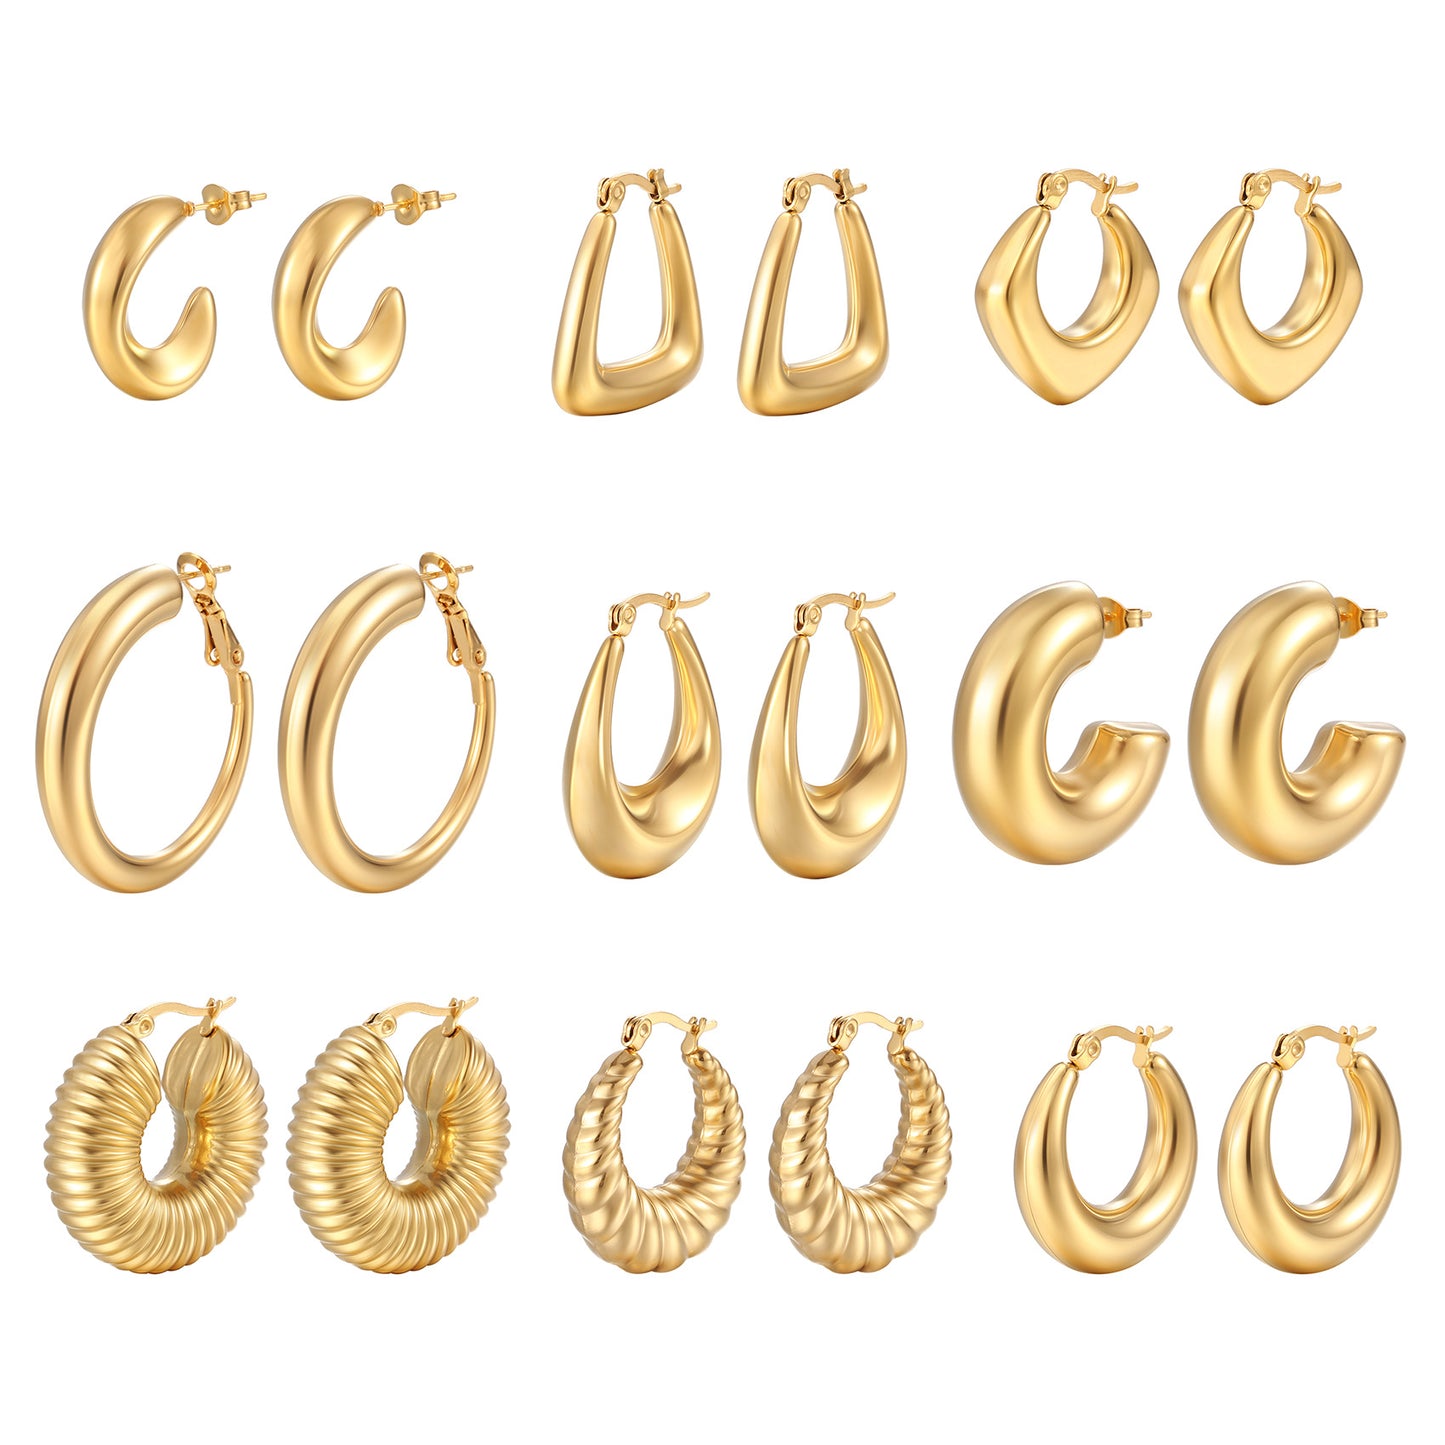 Wholesale fashion stainless steel jewelry earrings gold huggie hoop earring women jewelry China Manufacturer Supplier